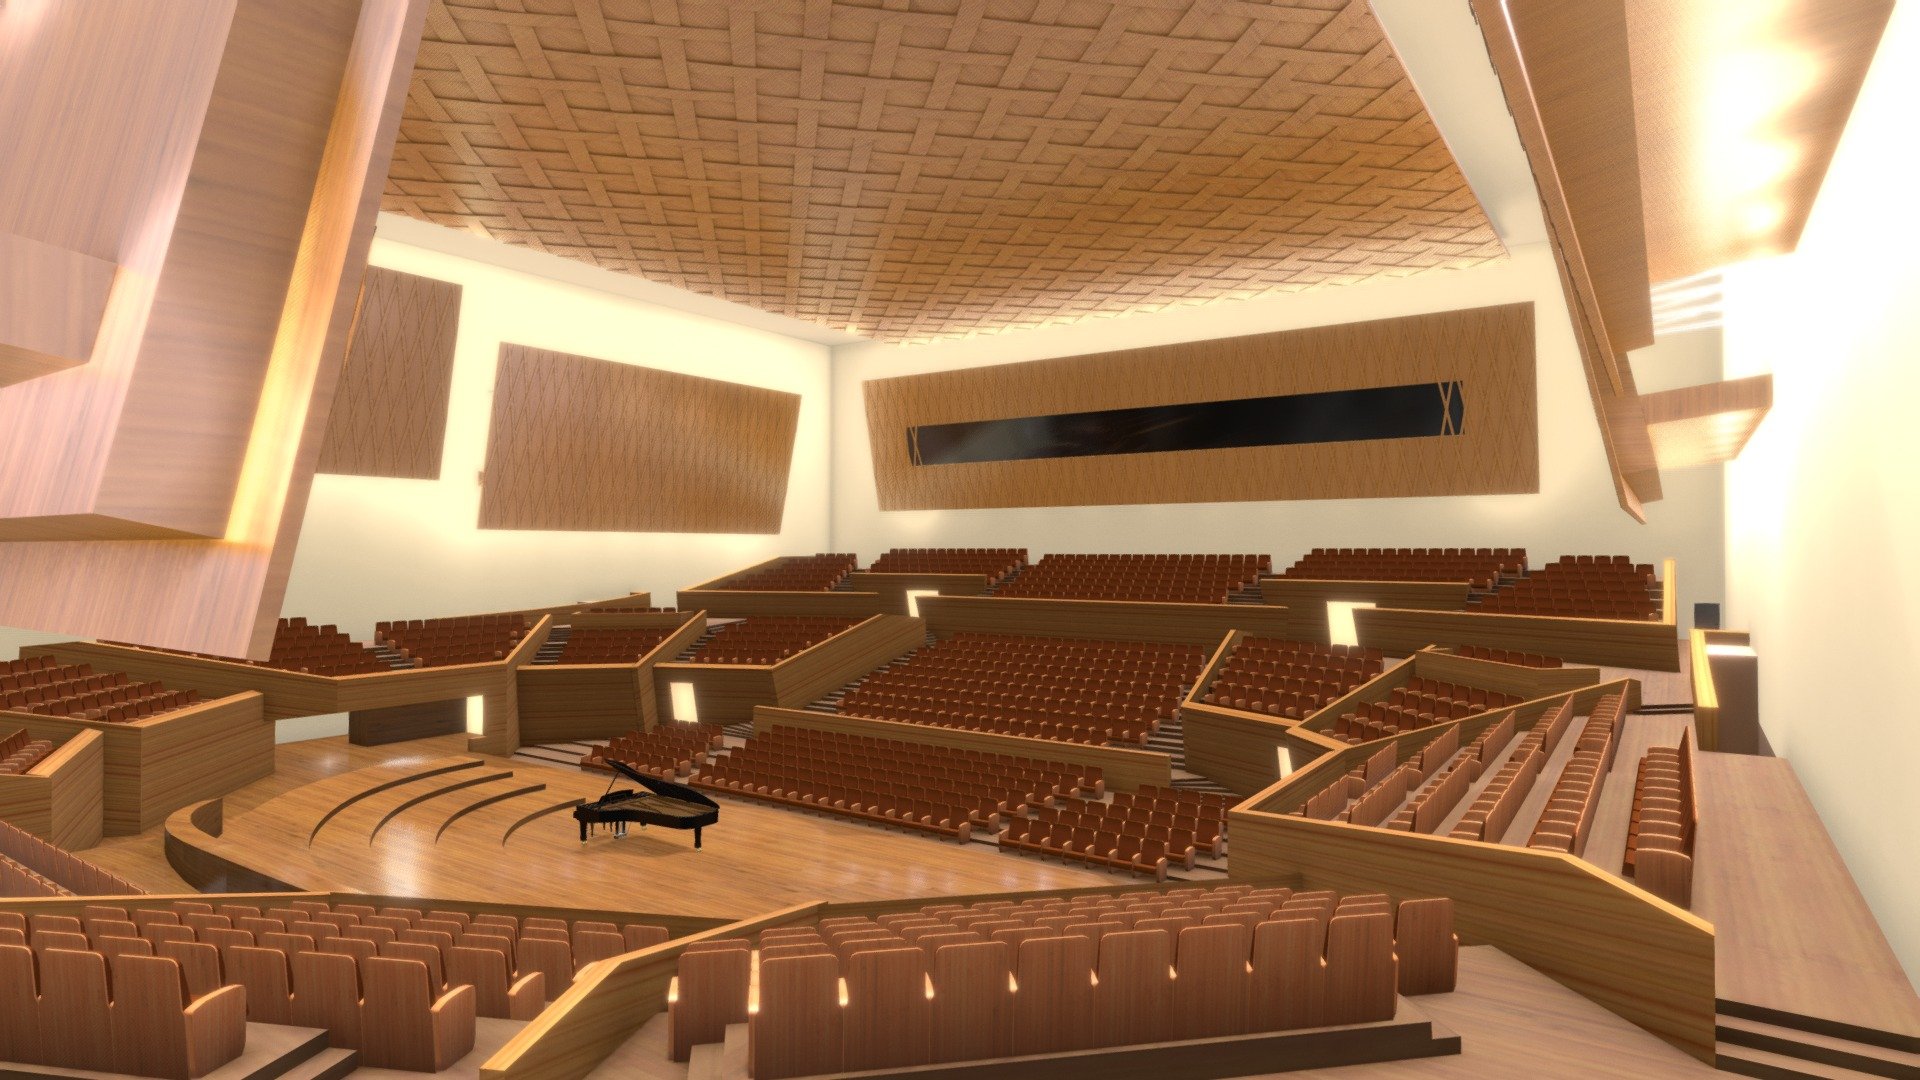 Concert Hall | Amphitheater VR 2021 (5.5MB FBX) - Buy Royalty Free 3D model  by BehNaM (@GbehnamG) [b3c6a1e]